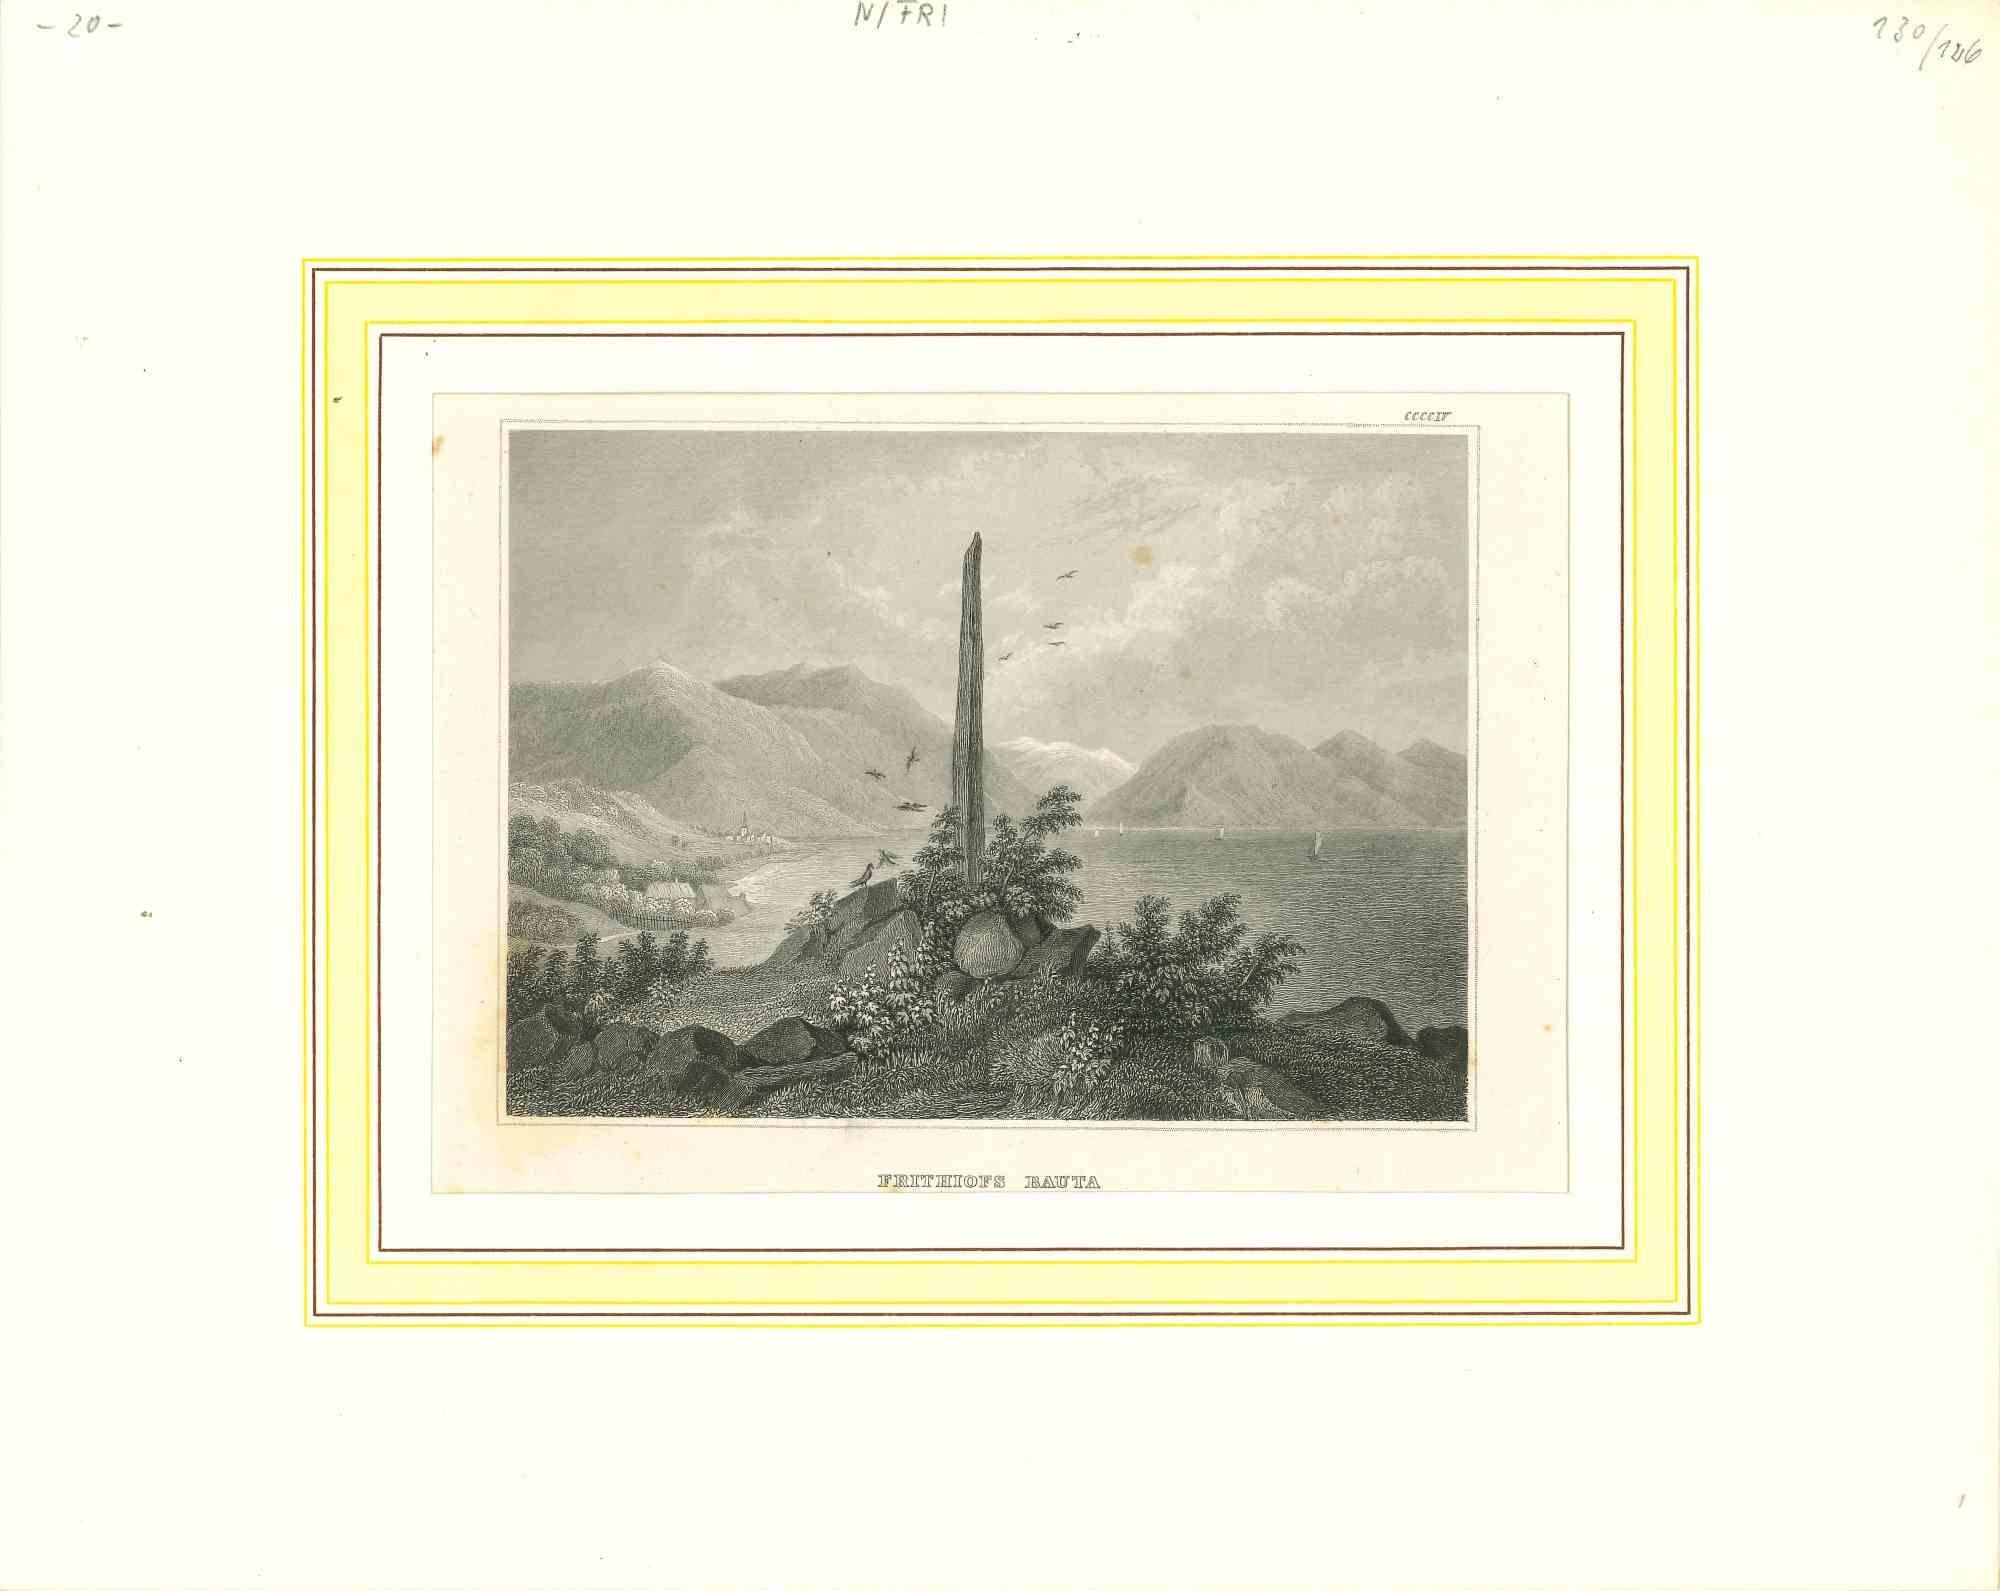 Unknown Landscape Print - Ancient View of Frithiofs Bauta - Original Lithograph - Early 19th Century